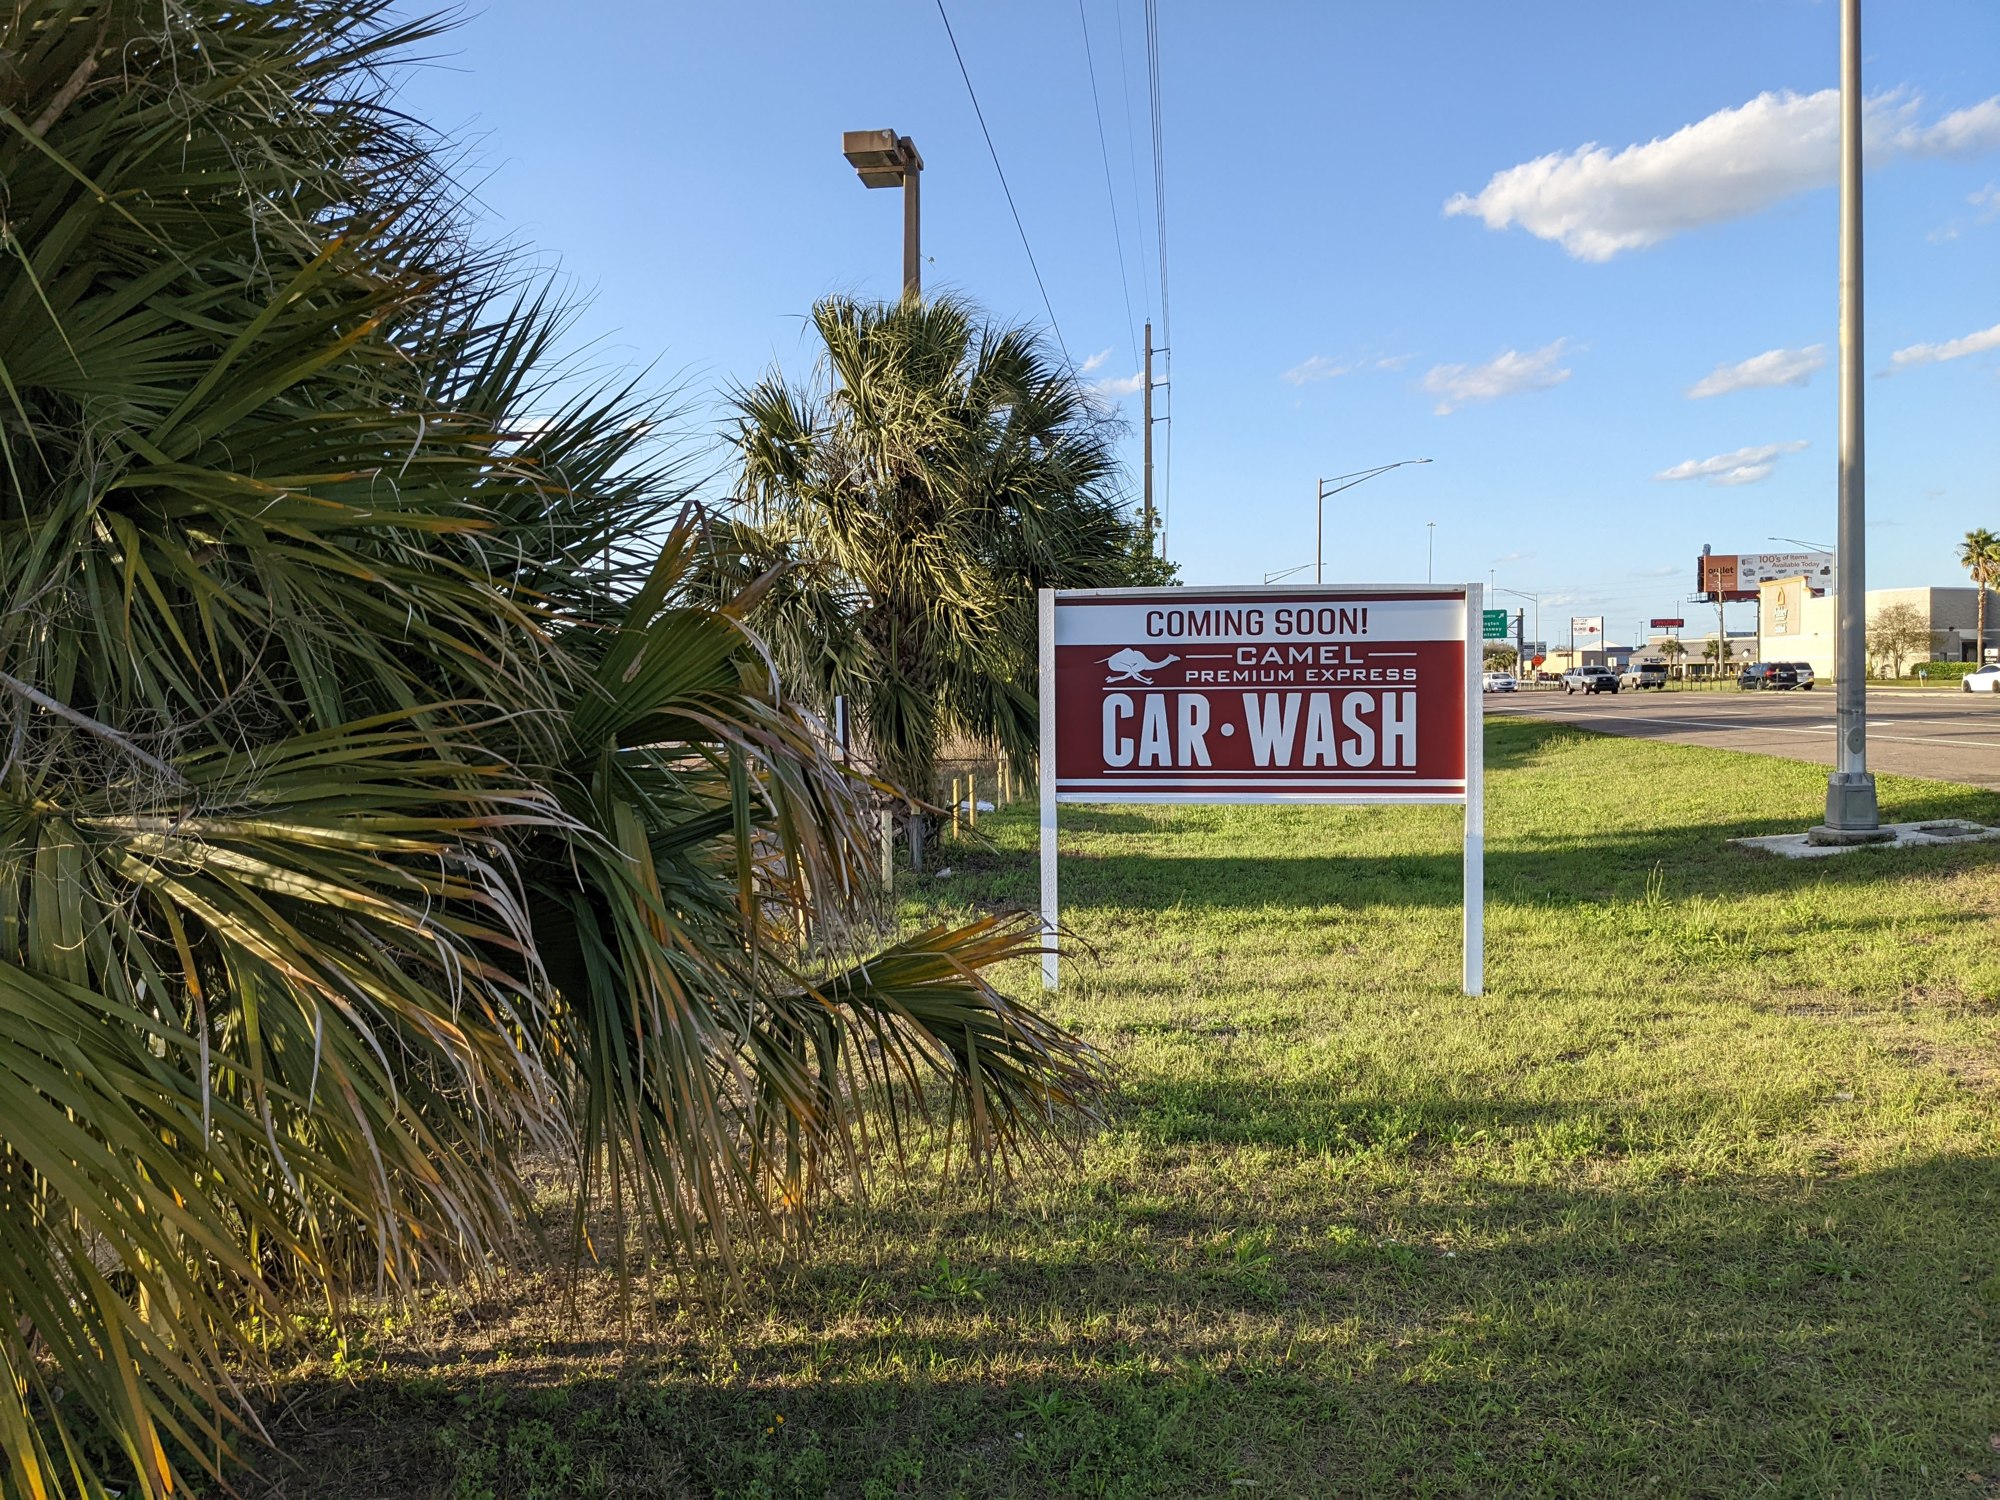 There is a sign along the property for Camel Premium Express Car Wash.